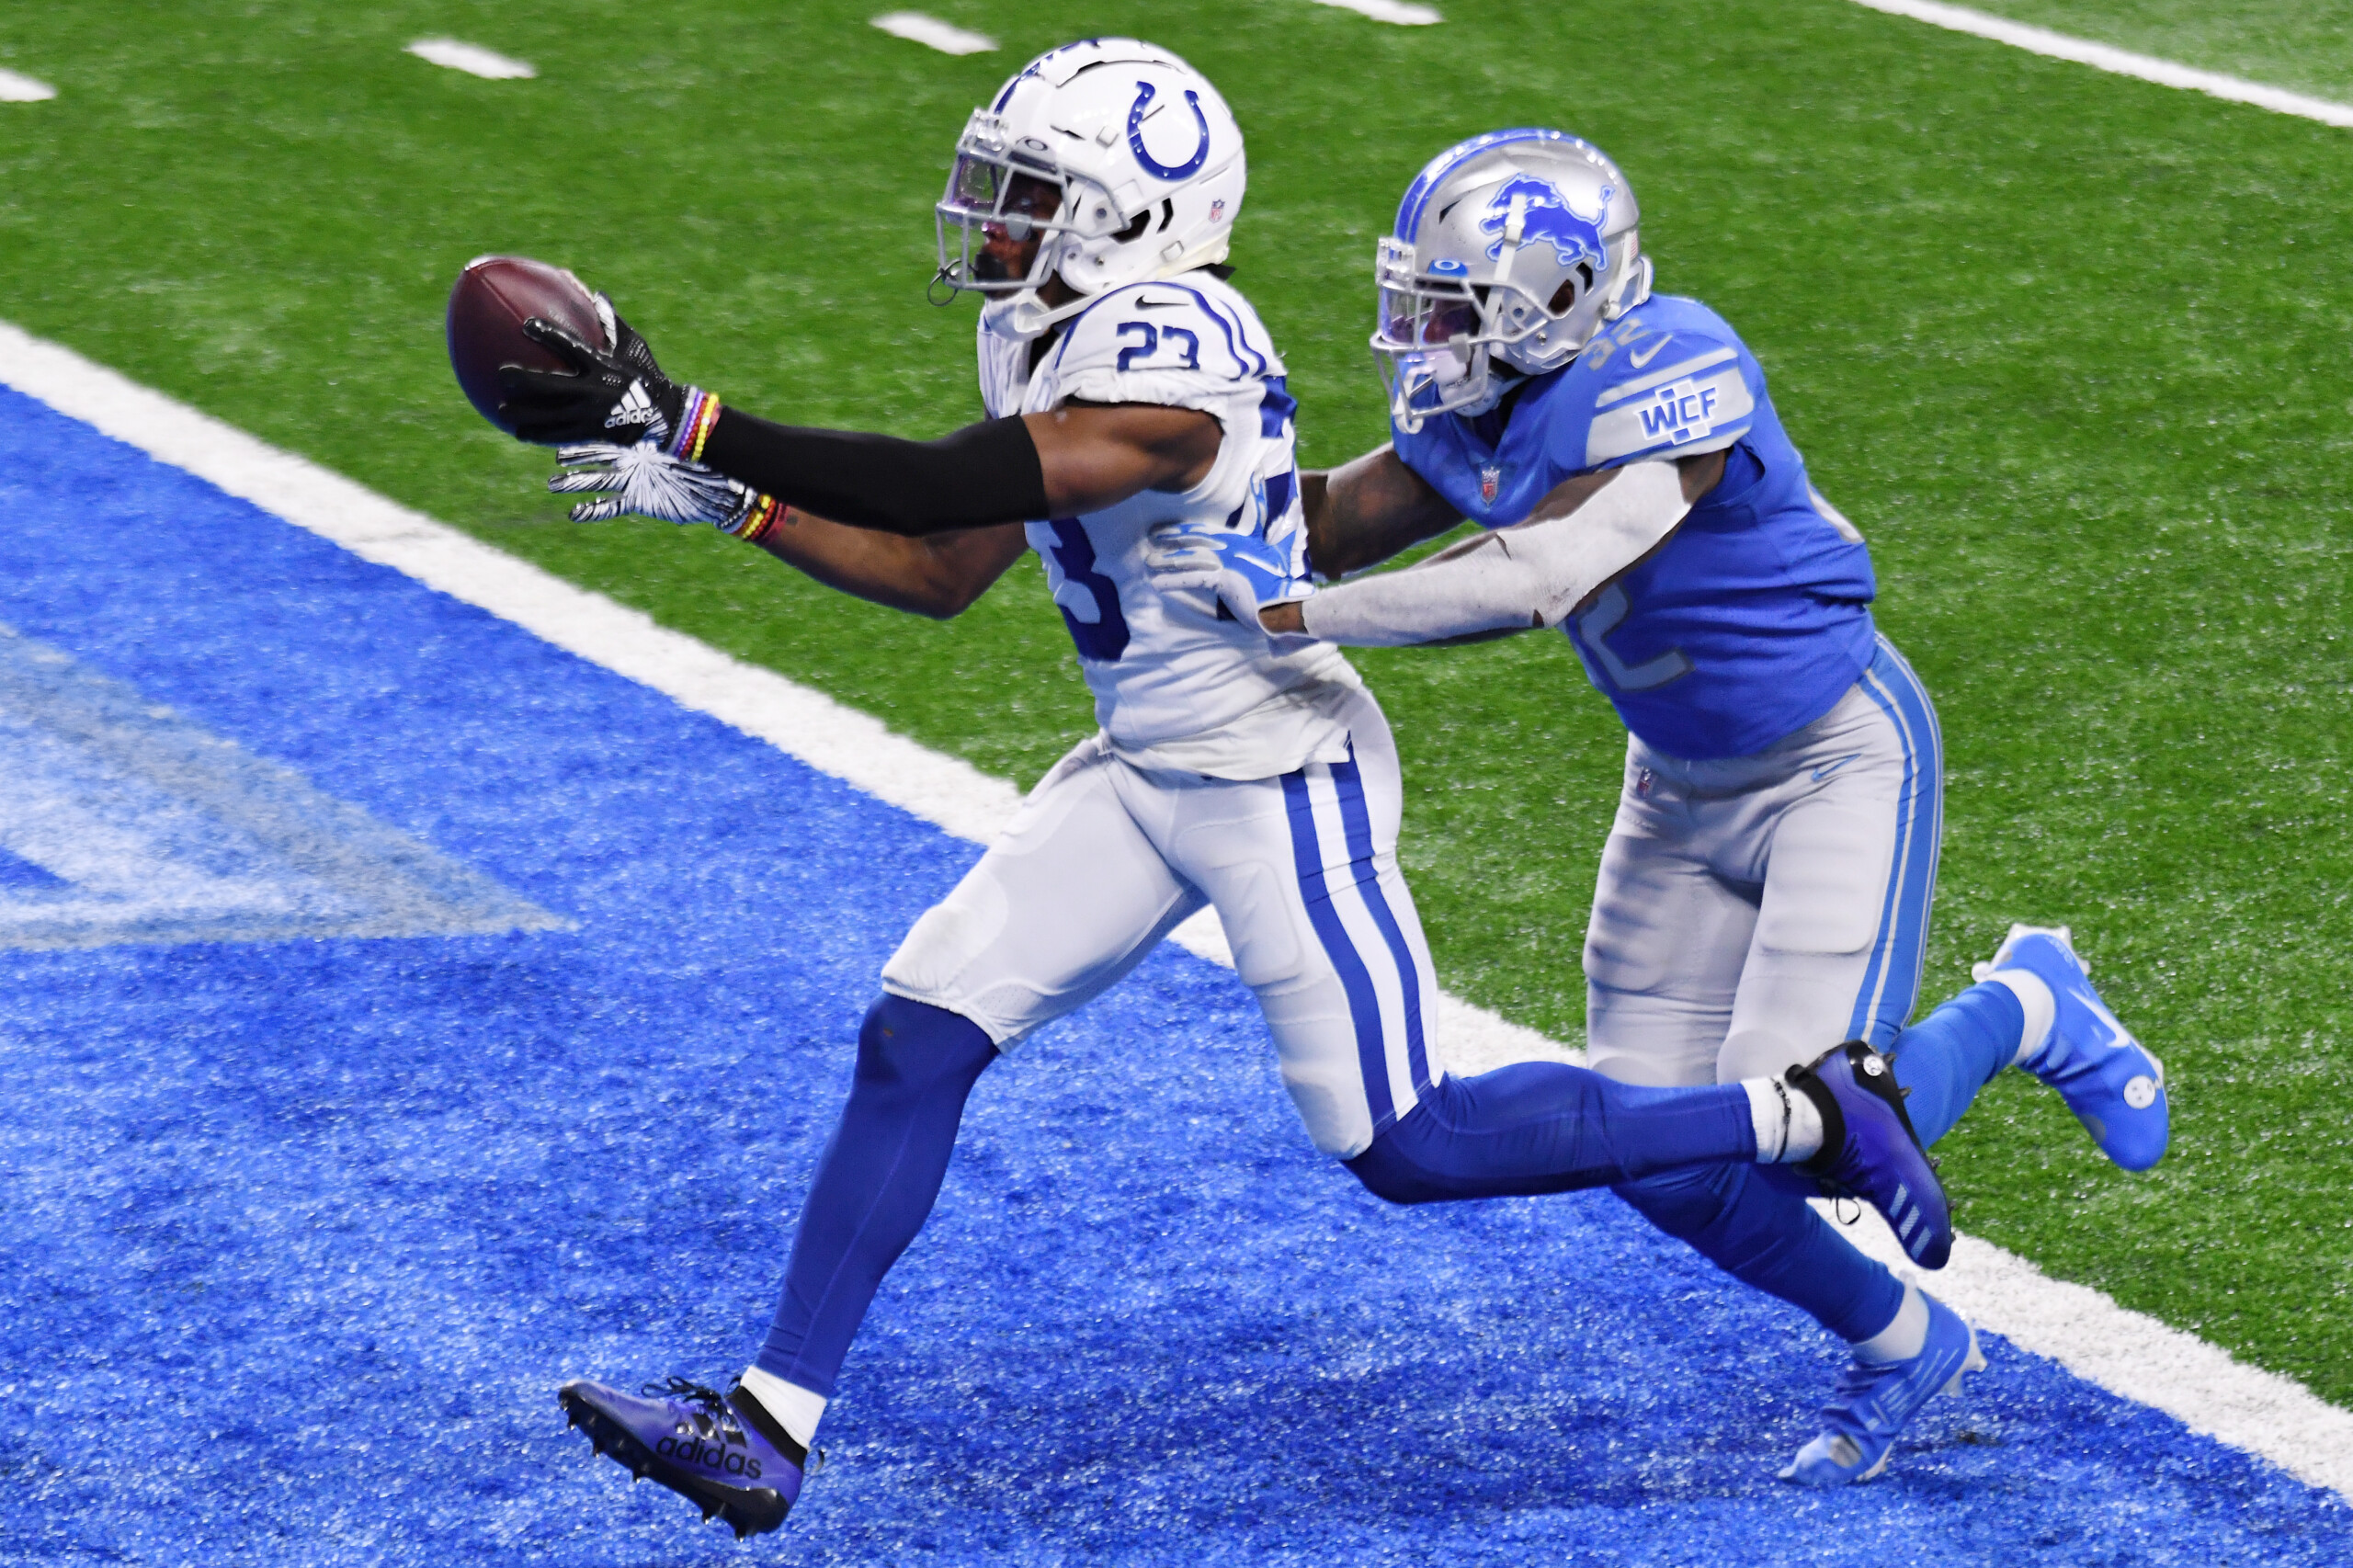 Rivers' 3 TDs in 2nd quarter help Colts beat Lions 41-21 - WISH-TV, Indianapolis News, Indiana Weather